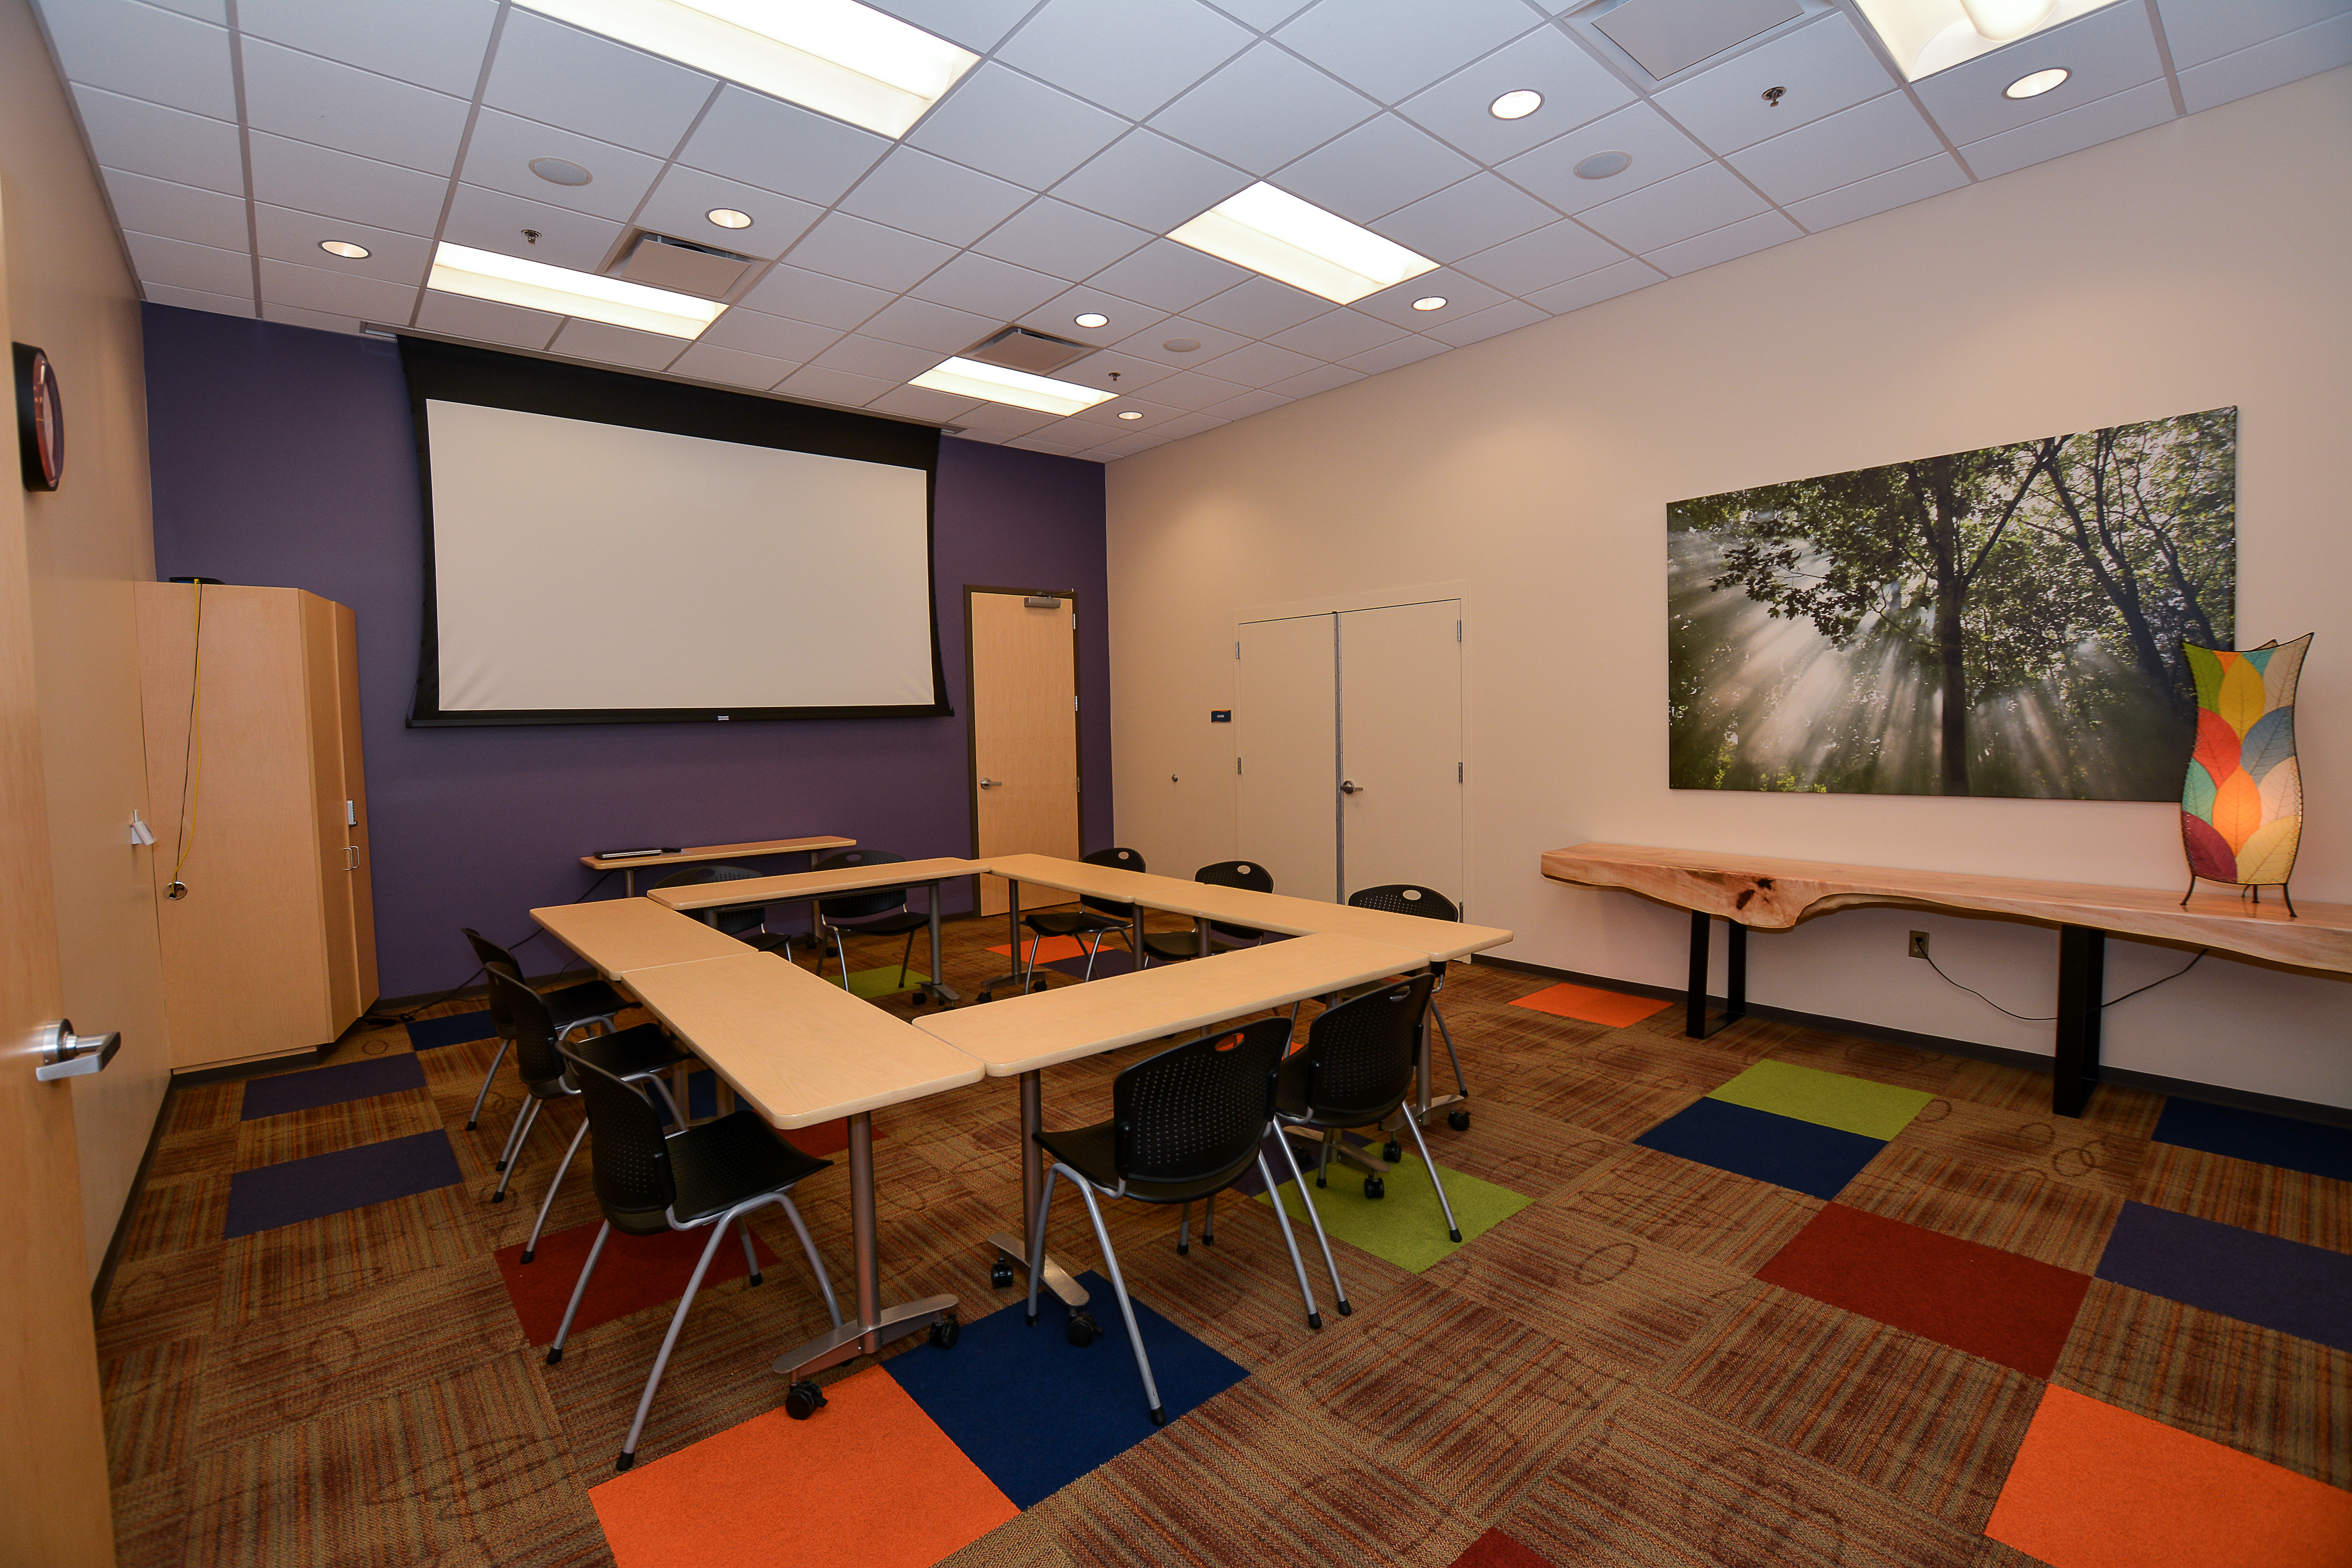 SEEK is a smaller dedicated meeting space at AL!VE. It can accommodate up to 15 people in an open square configuration (as pictured above) or approximately 30 theater style. This space rents for $150 for 1/2 day (up to 4 hours) or $225 for full day (up to 8 hours). Room rental includes use of A/V which is built into the infrastructure of the room and includes projector/screen and conference calling capabilities.